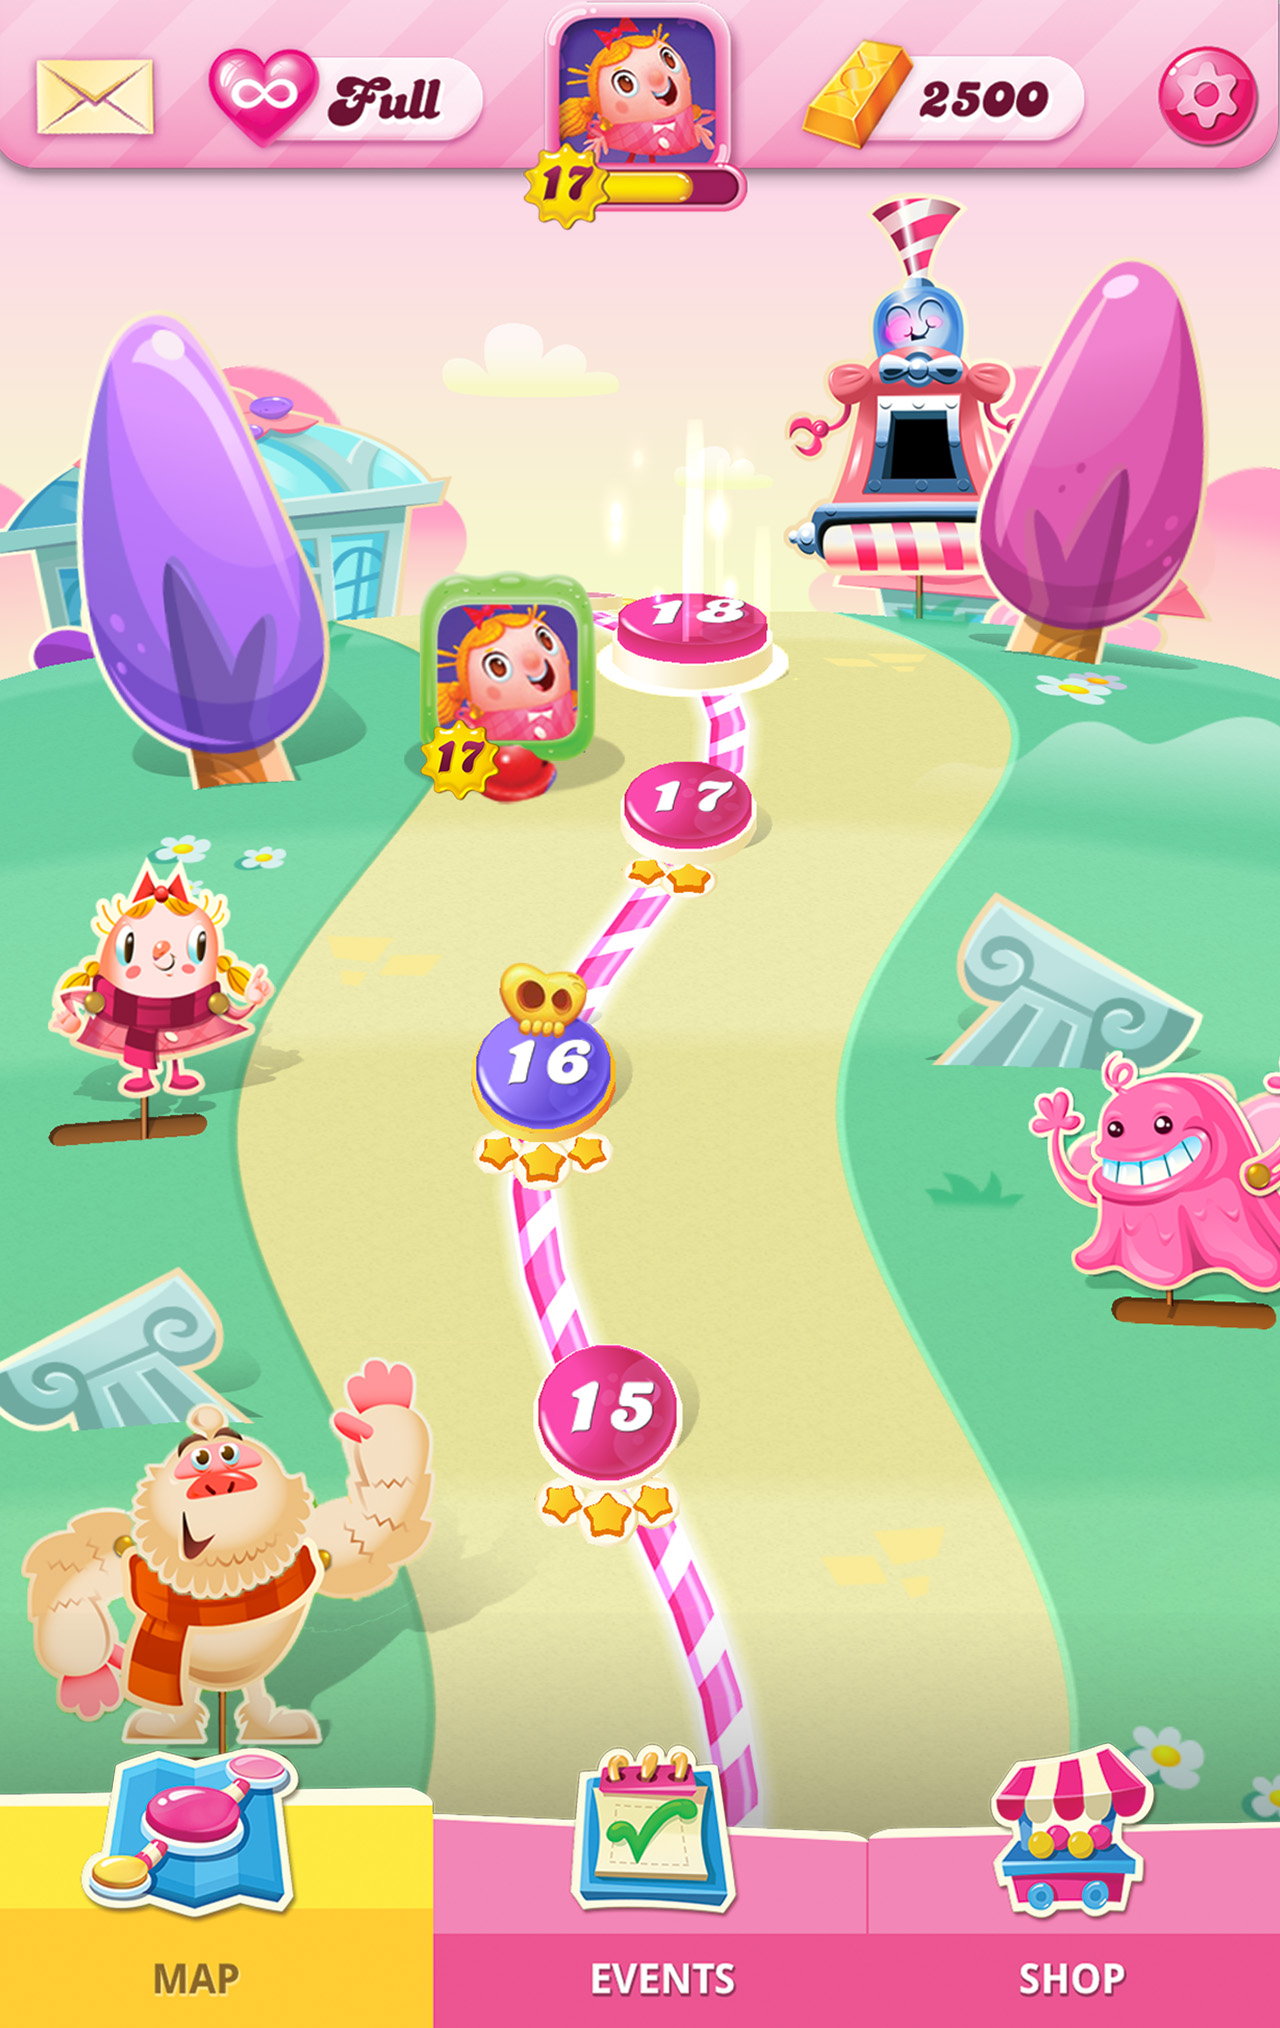 Download Candy Crush Saga on PC with NoxPlayer - Appcenter